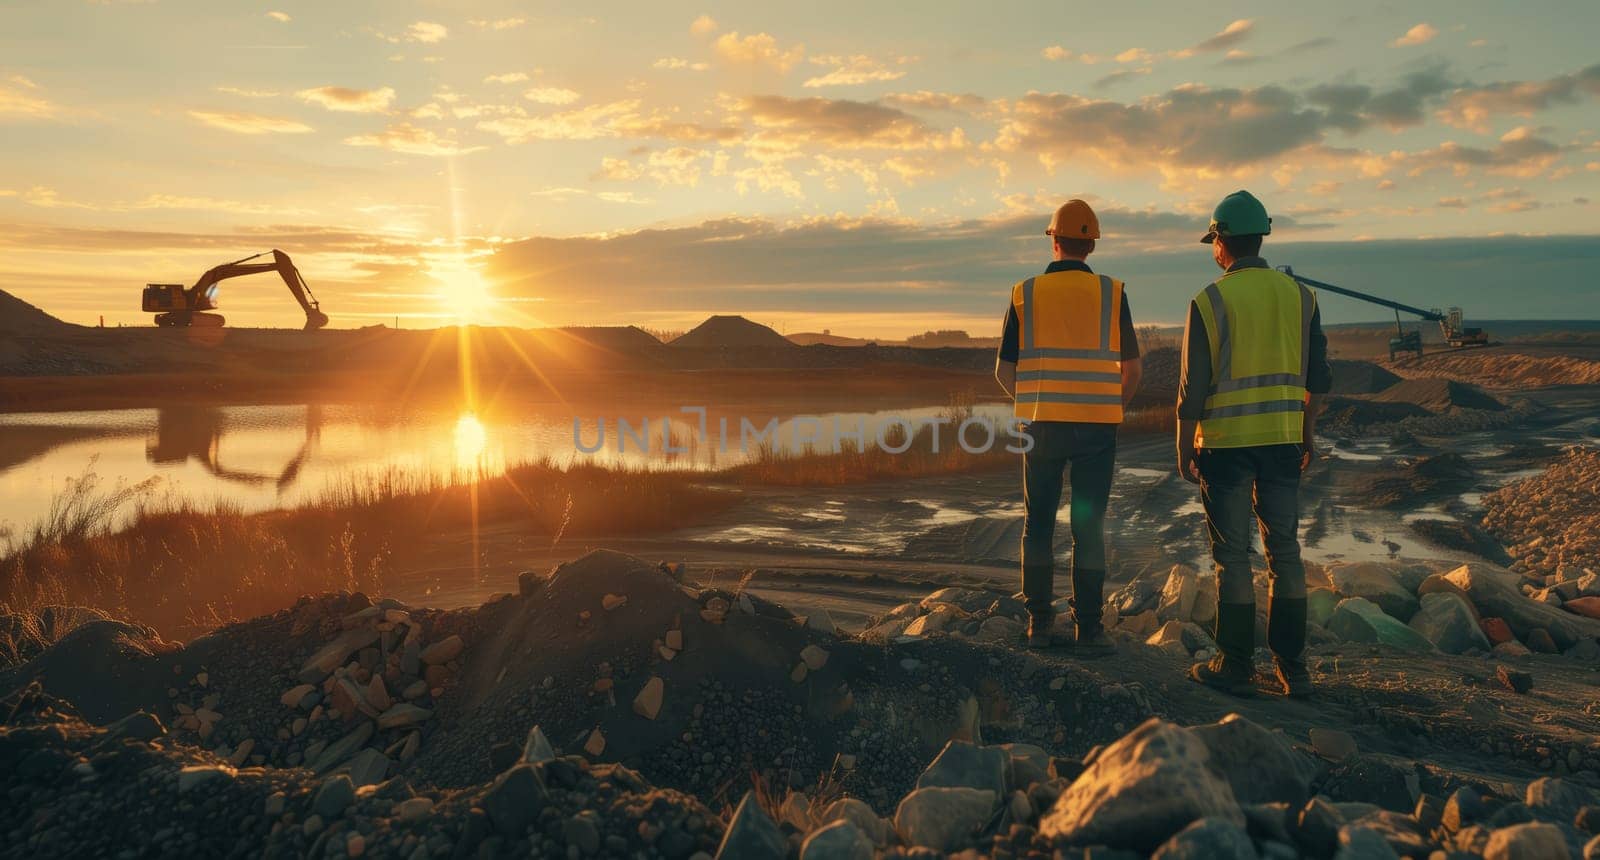 Two construction workers enjoy the sunset on a rocky hill, mesmerized by the stunning natural landscape with clouds painting the sky in hues of orange and pink